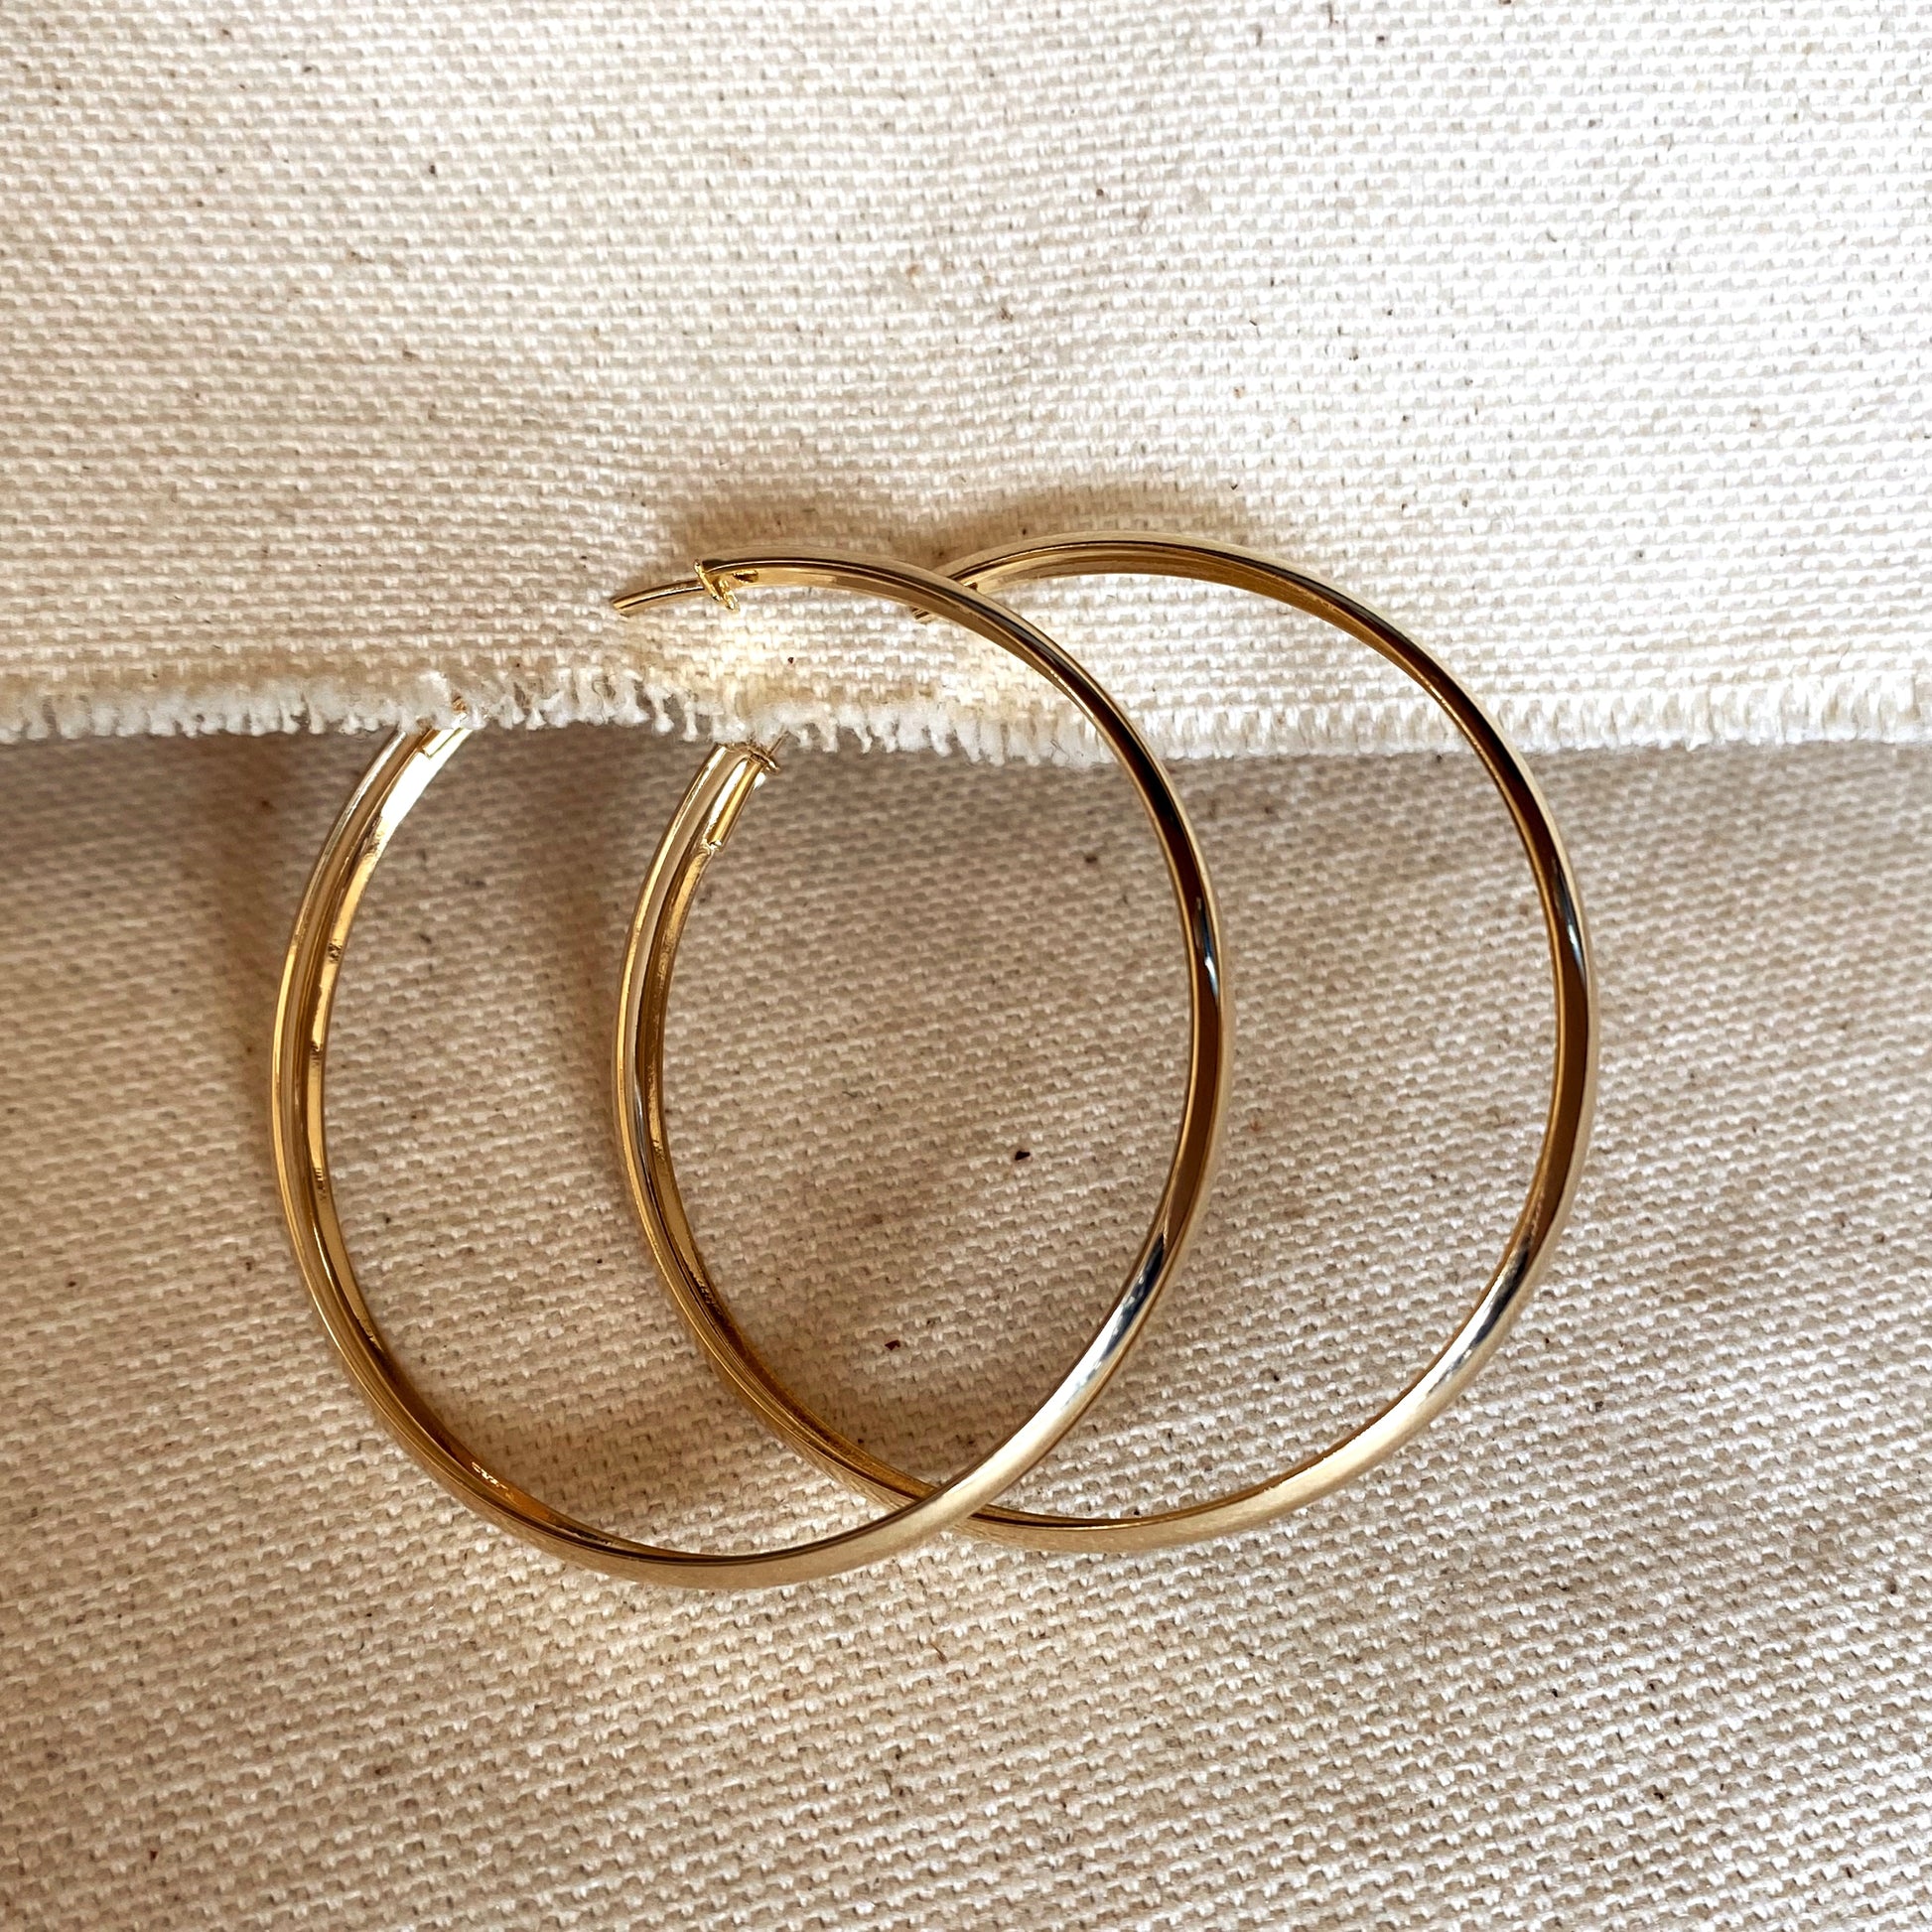 GoldFi 18k Gold Filled 50mm Hollow Continuous Hoop Earrings